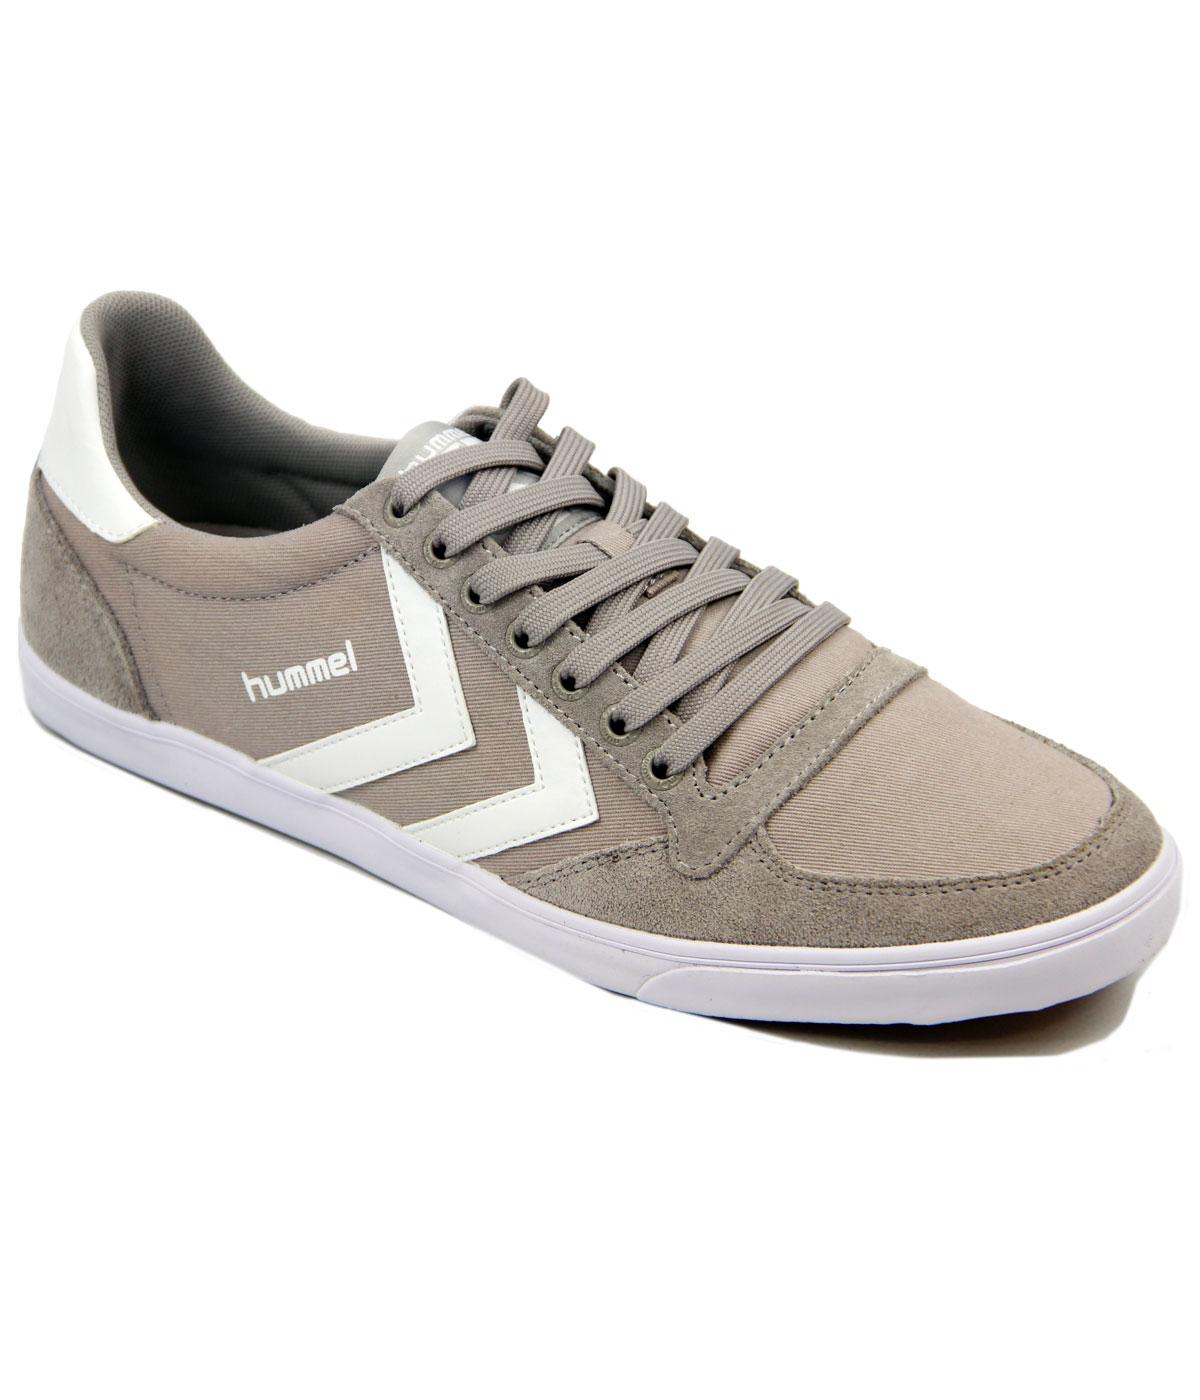 HUMMEL Slimmer Stadil Low Canvas Retro Trainers DW